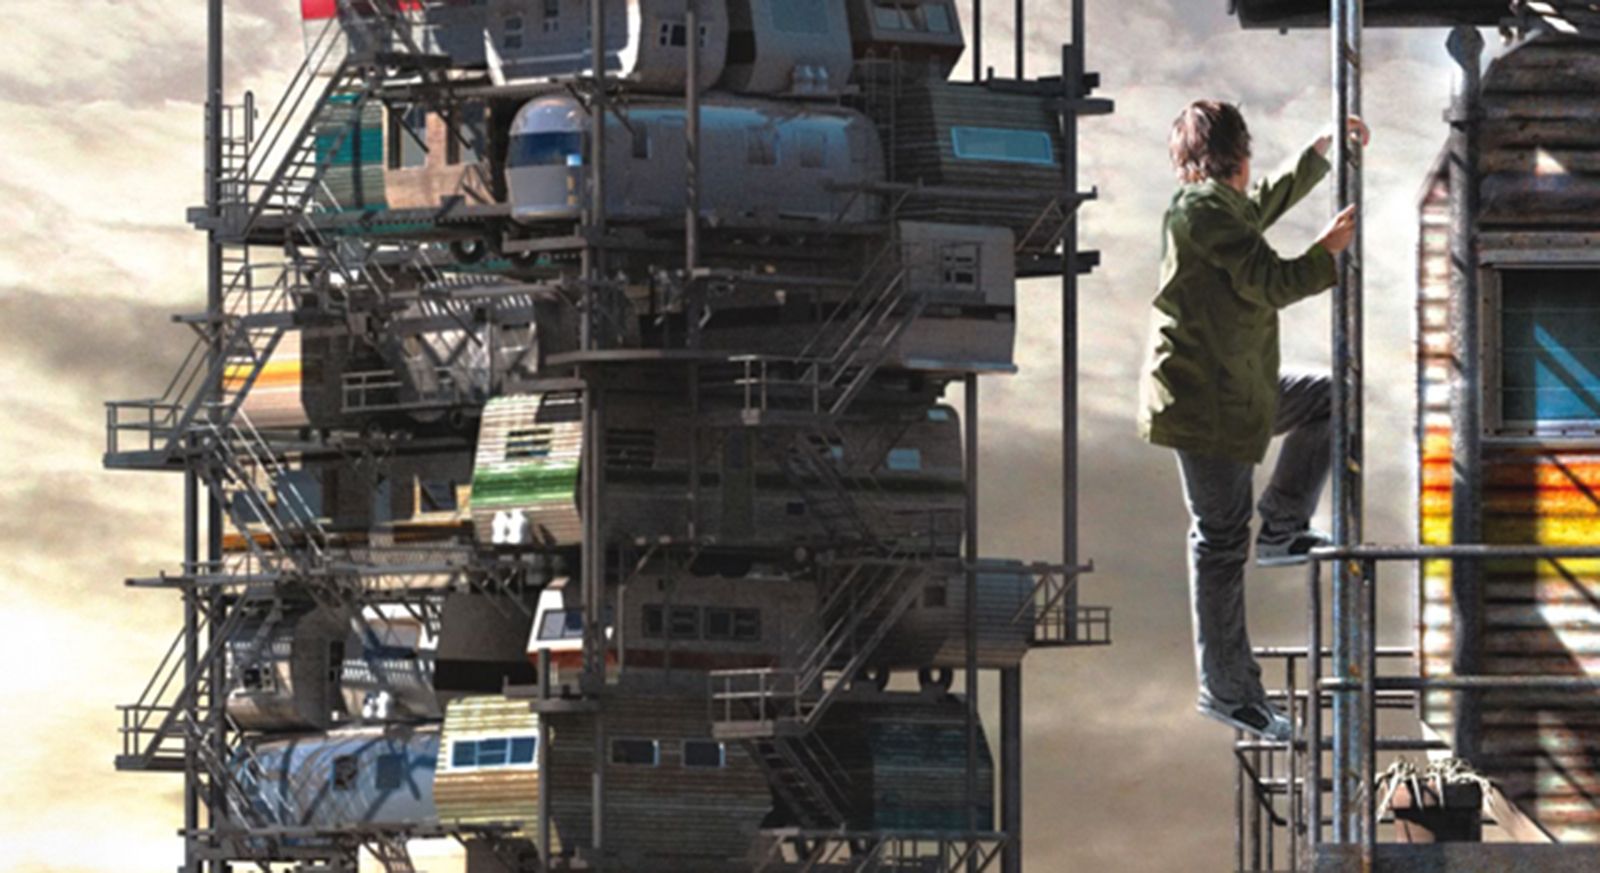 spielberg to adapt ready player one gamer novel may use magic leap tech for ar movie image 1